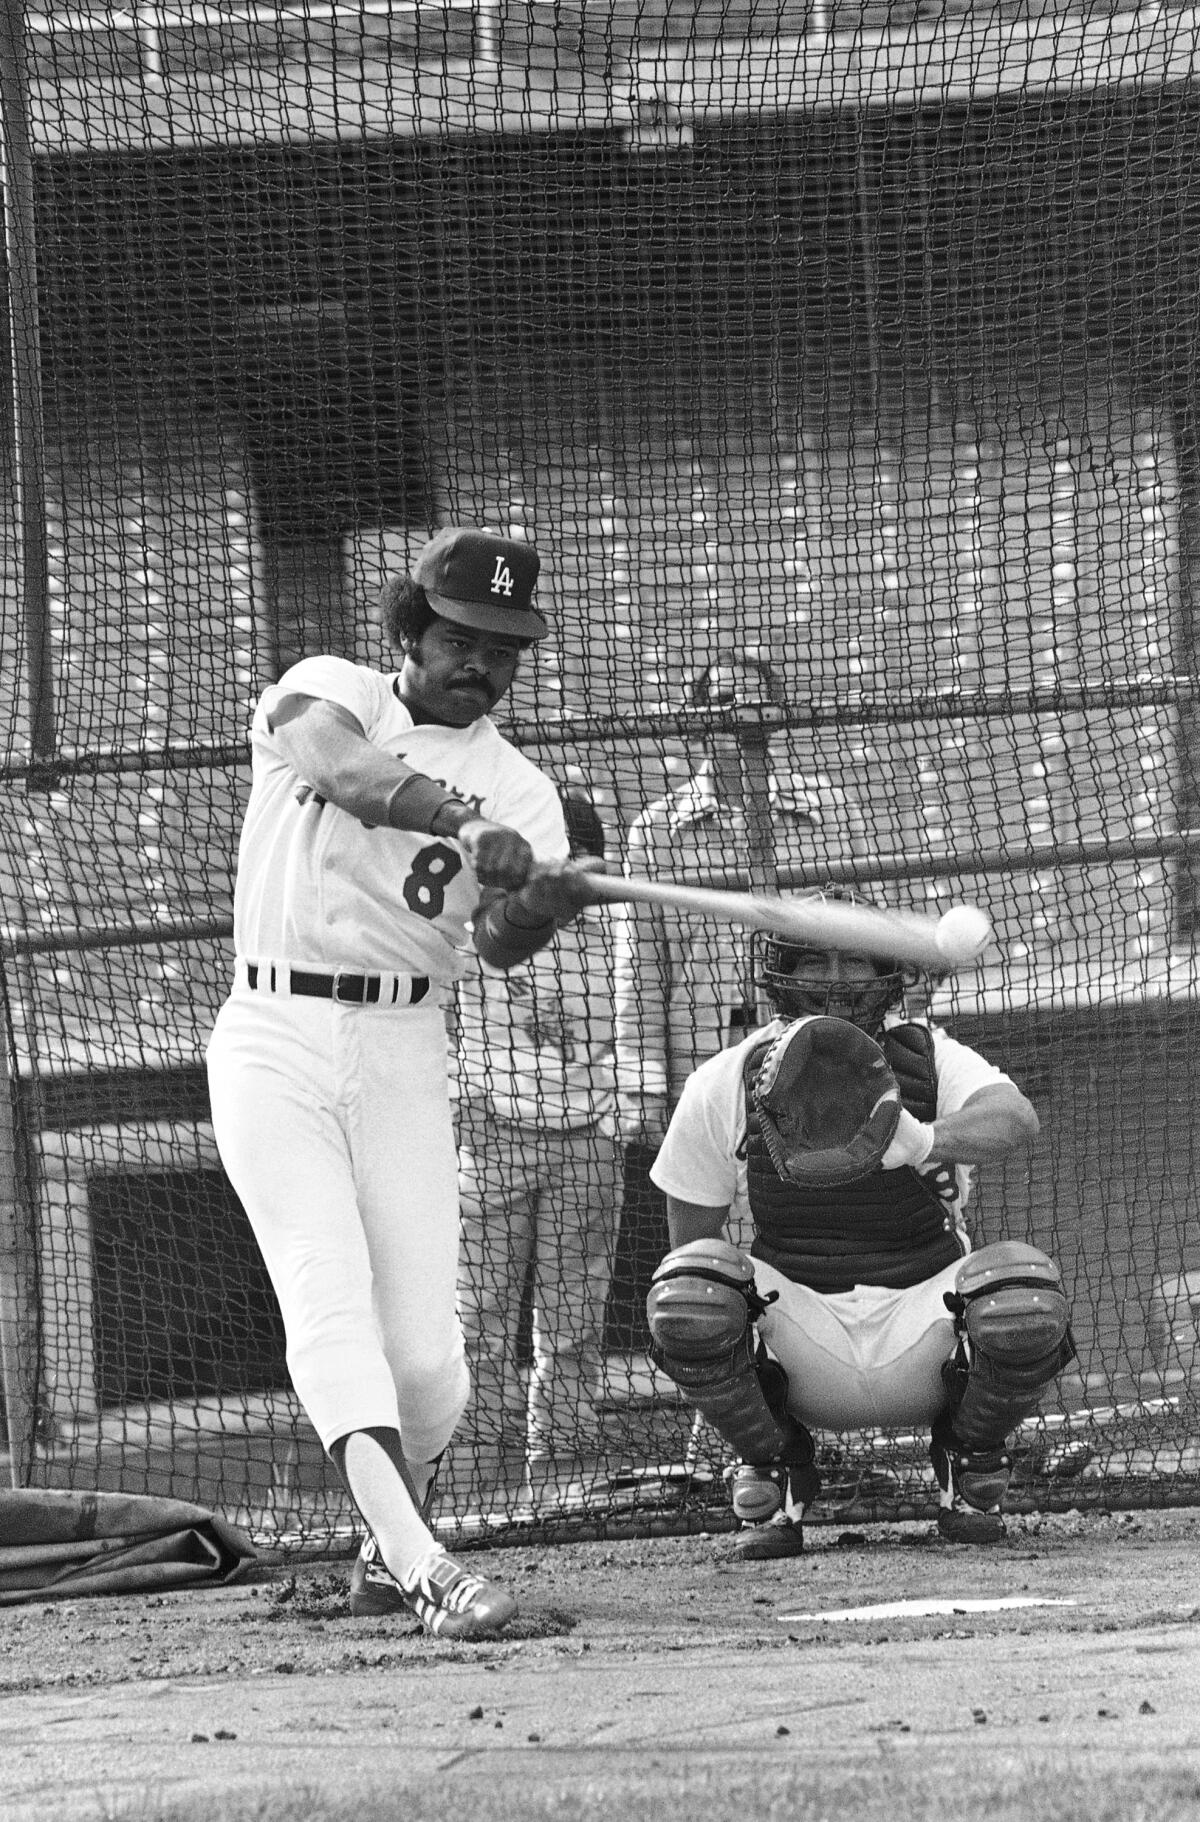 Dodgers outfielder Reggie Smith socks one away from bullpen catcher Mark Cresse during the team’s opening workout in 1978.